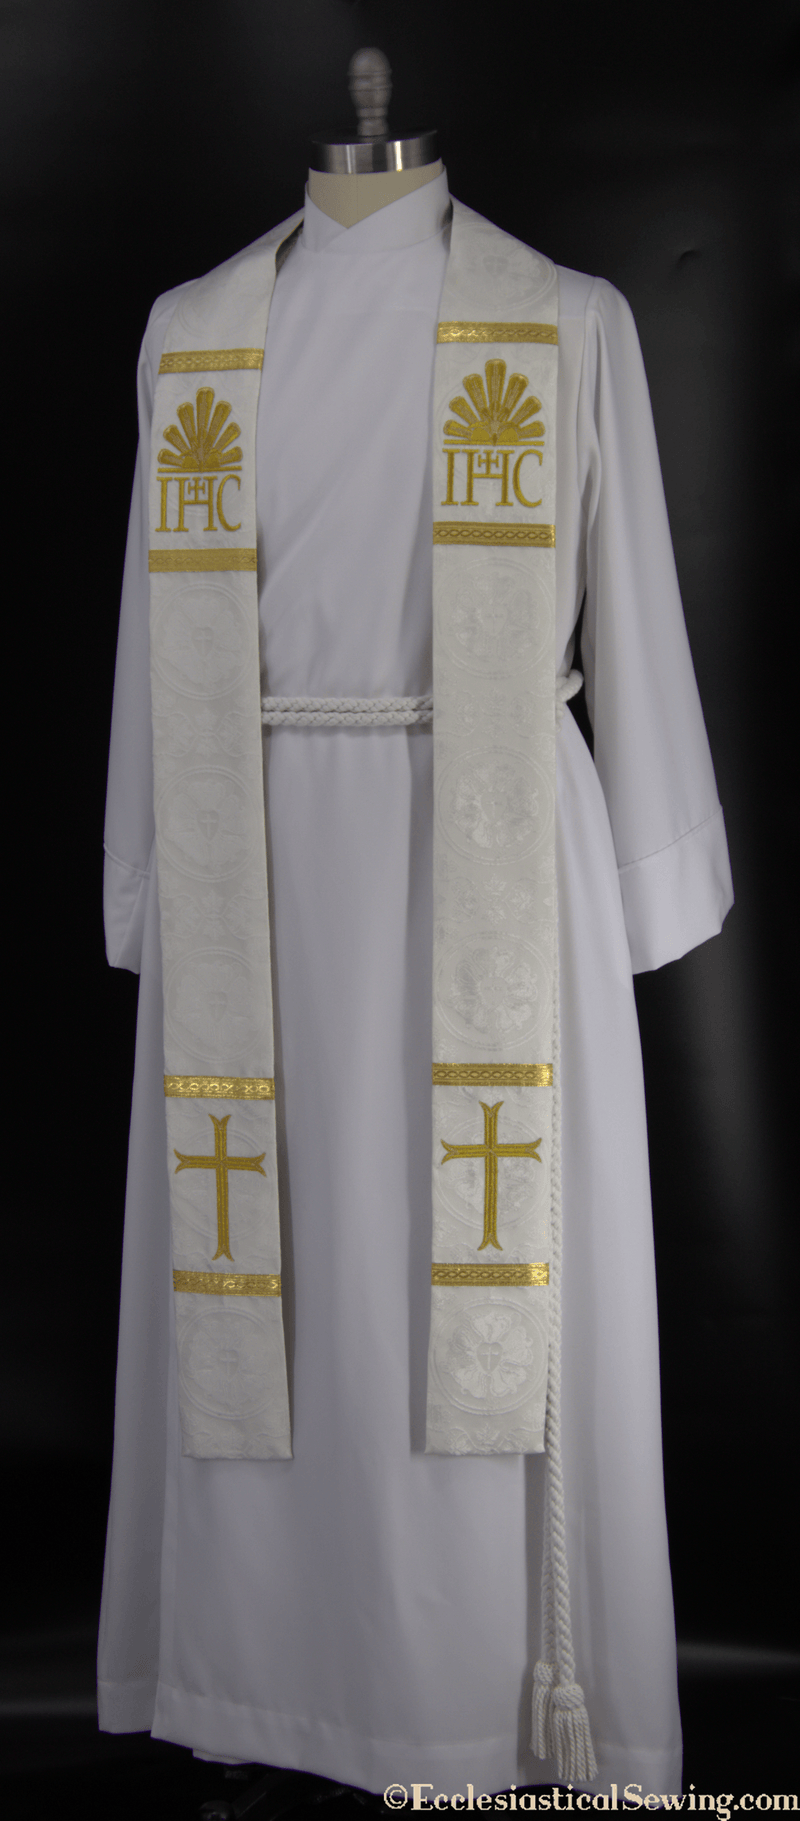 files/white-pastor-or-priest-stole-or-white-dayspring-ihc-monogram-festival-stole-ecclesiastical-sewing-3.png